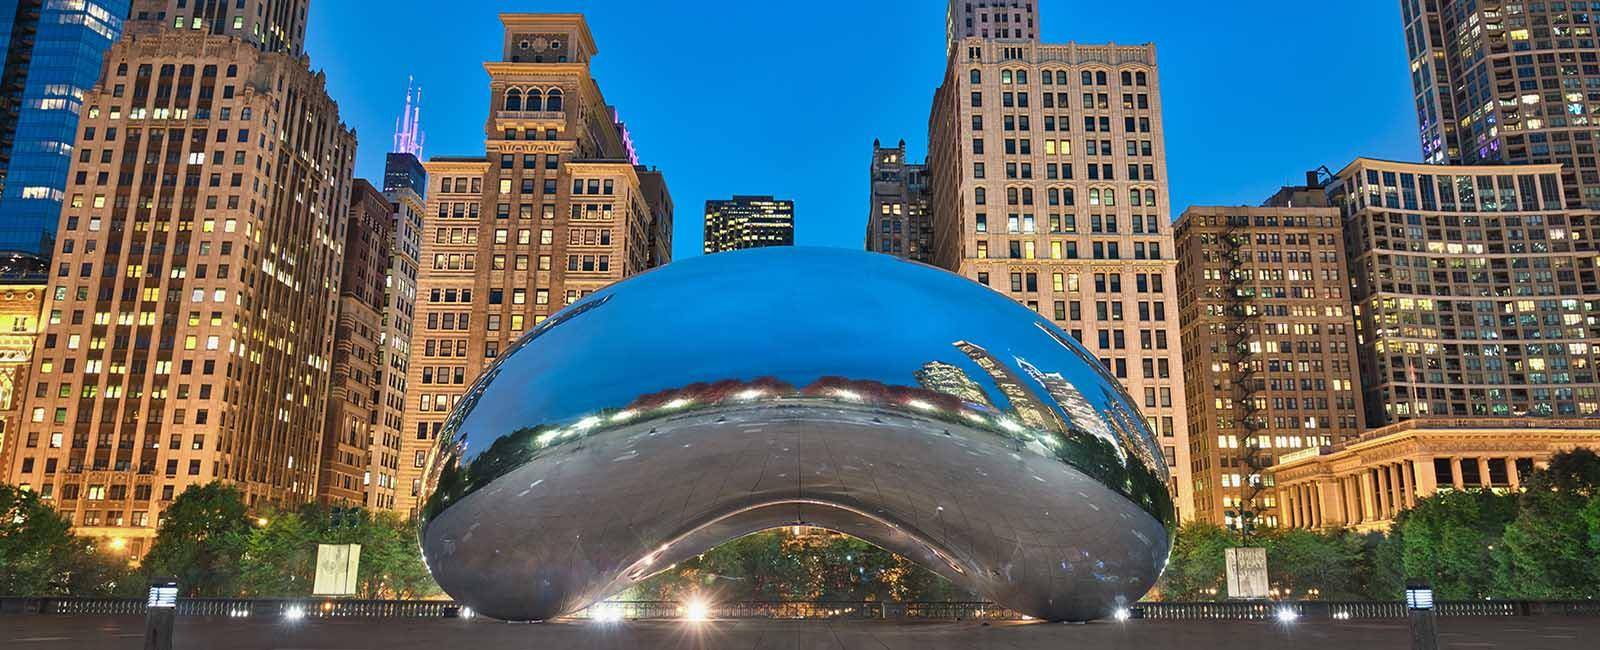 Cloud Gate sculpture at Millenium Park, Chicago |  See Chicago like a local